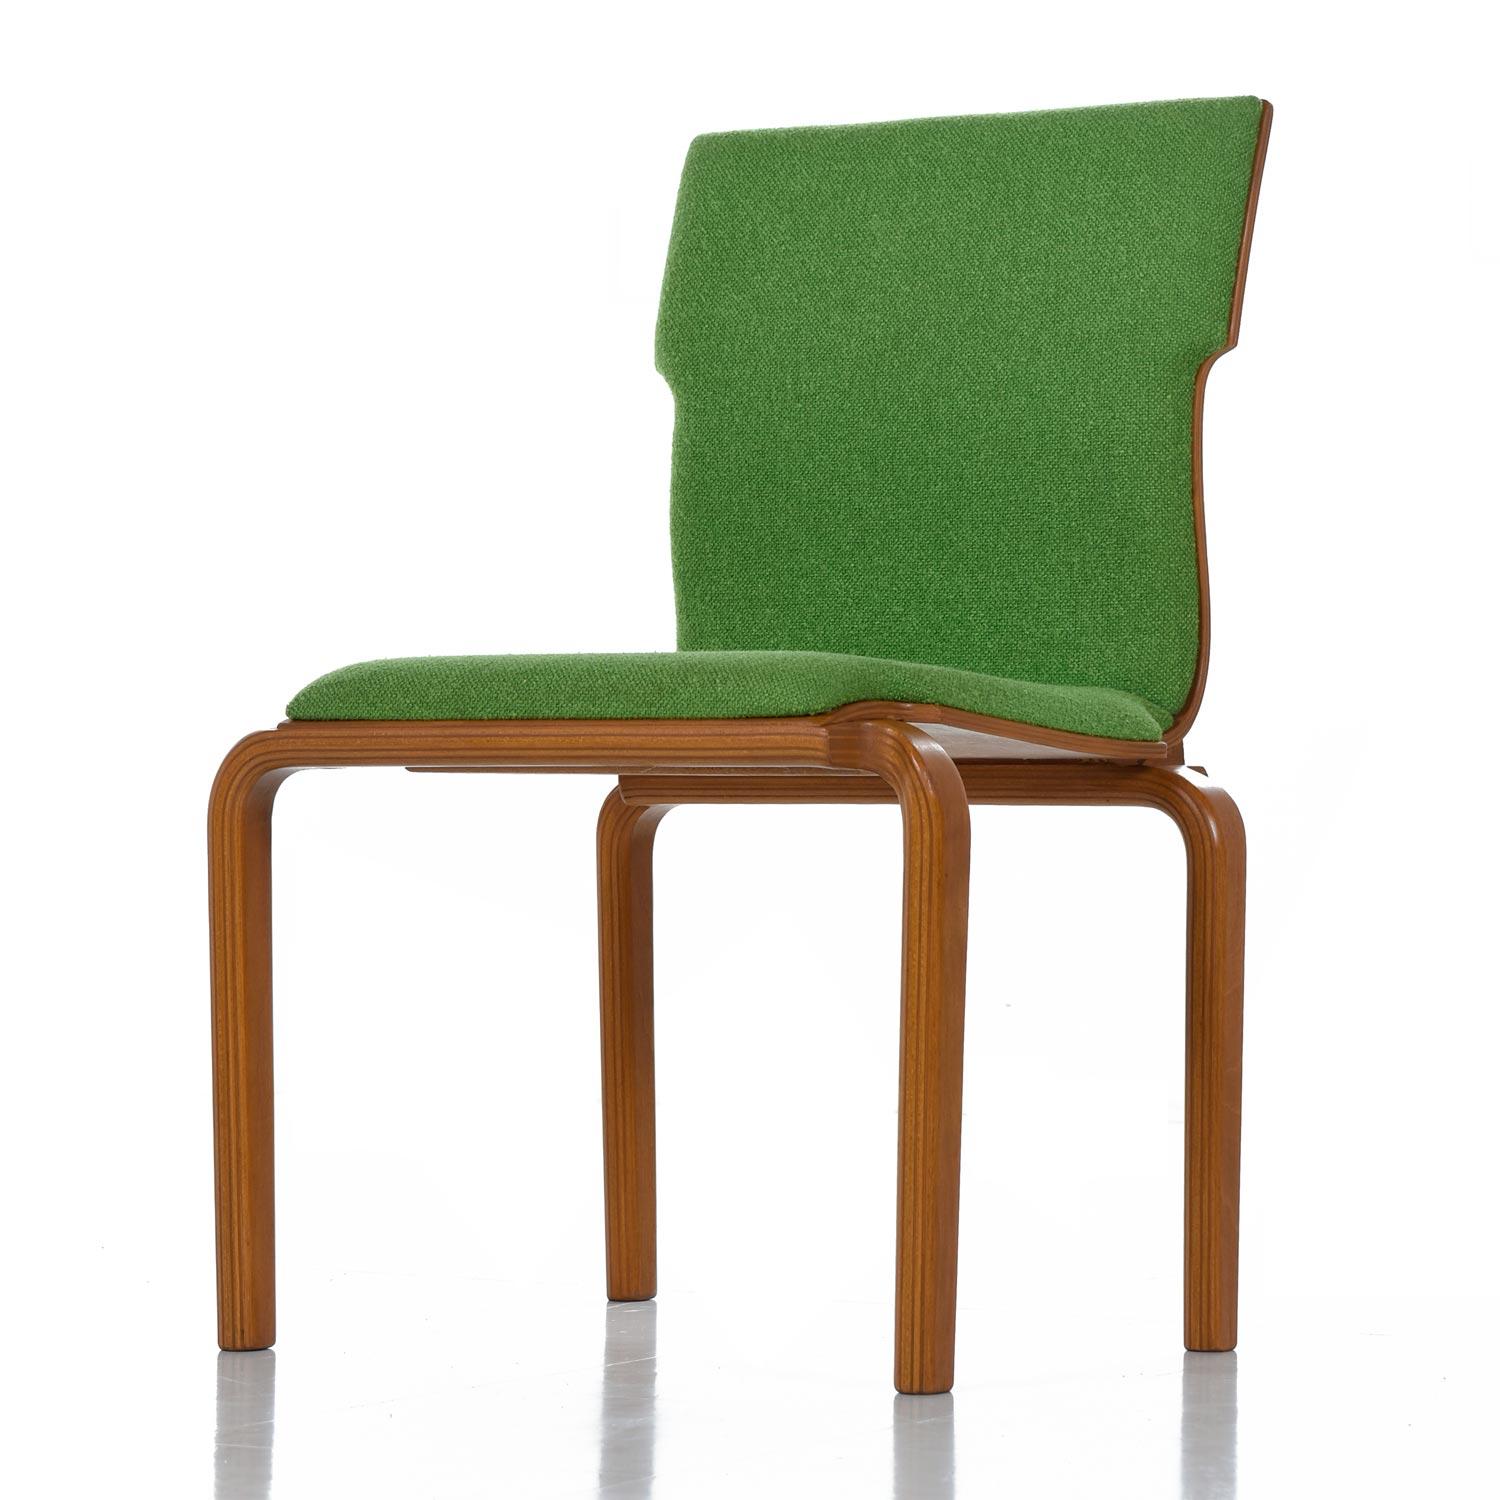 Unknown Thonet Style Mid-Century Modern Maple Bent Ply Green Wool Tweed Dining Chair Set